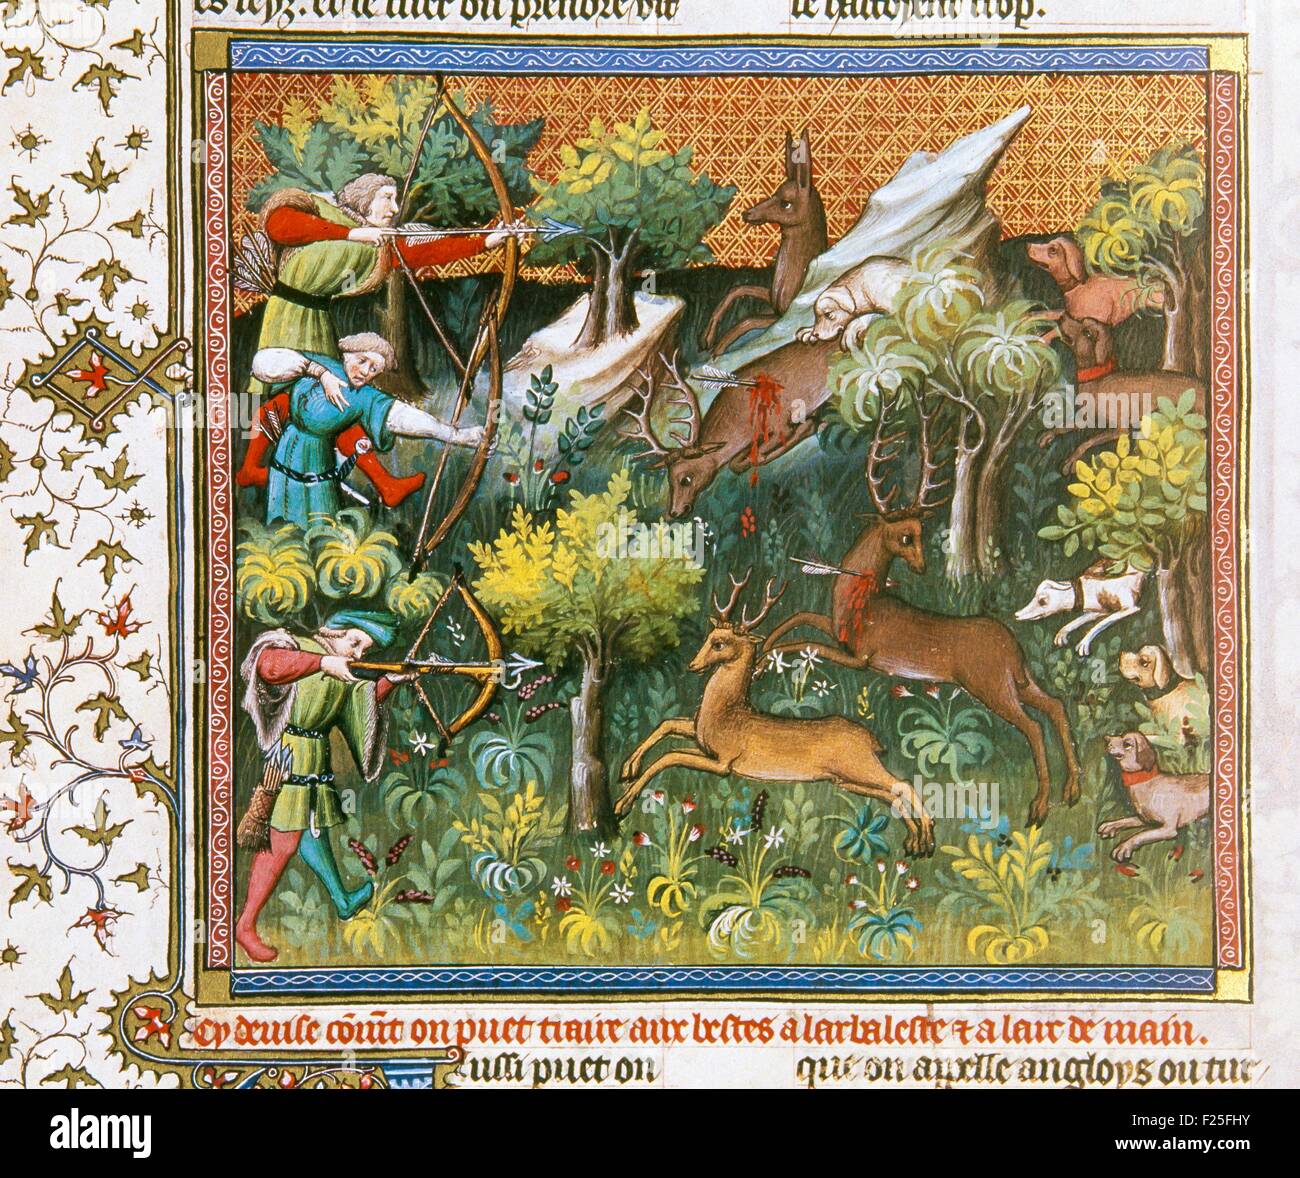 France, Ariege, Foix, illuminated manuscript of the Book of Hunting, venery medieval book composed between 1387 and 1389 by Gaston Phoebus (Gaston III of Foix-Bearn, Count of Foix and Bearn Stock Photo